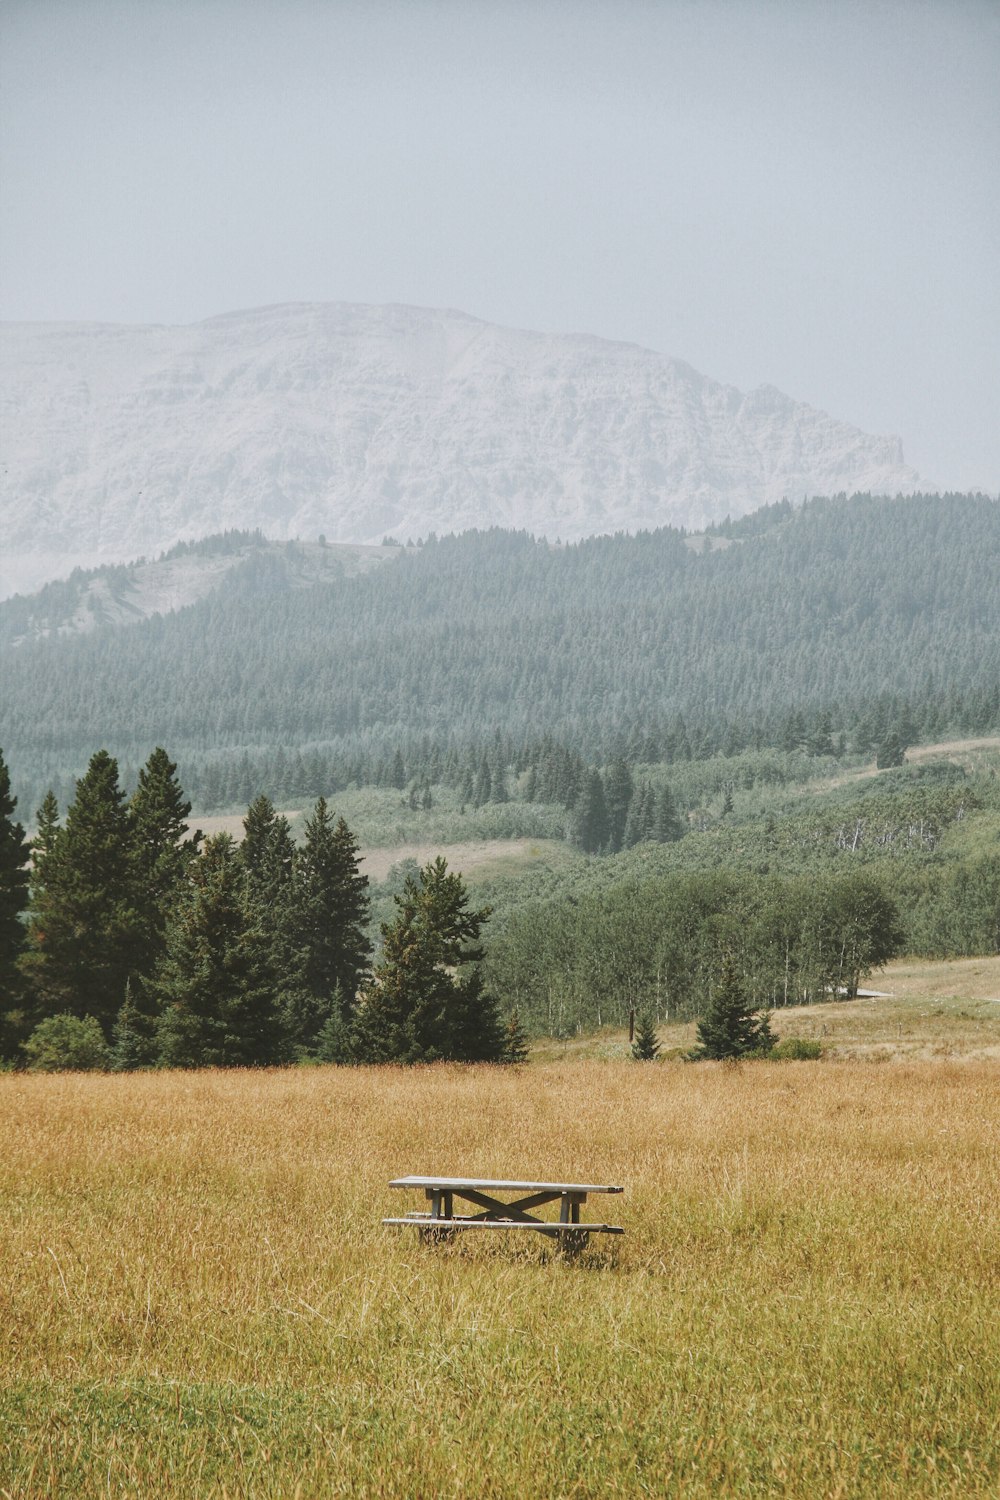 brown wooden bench in middle of open field overlooking mountains